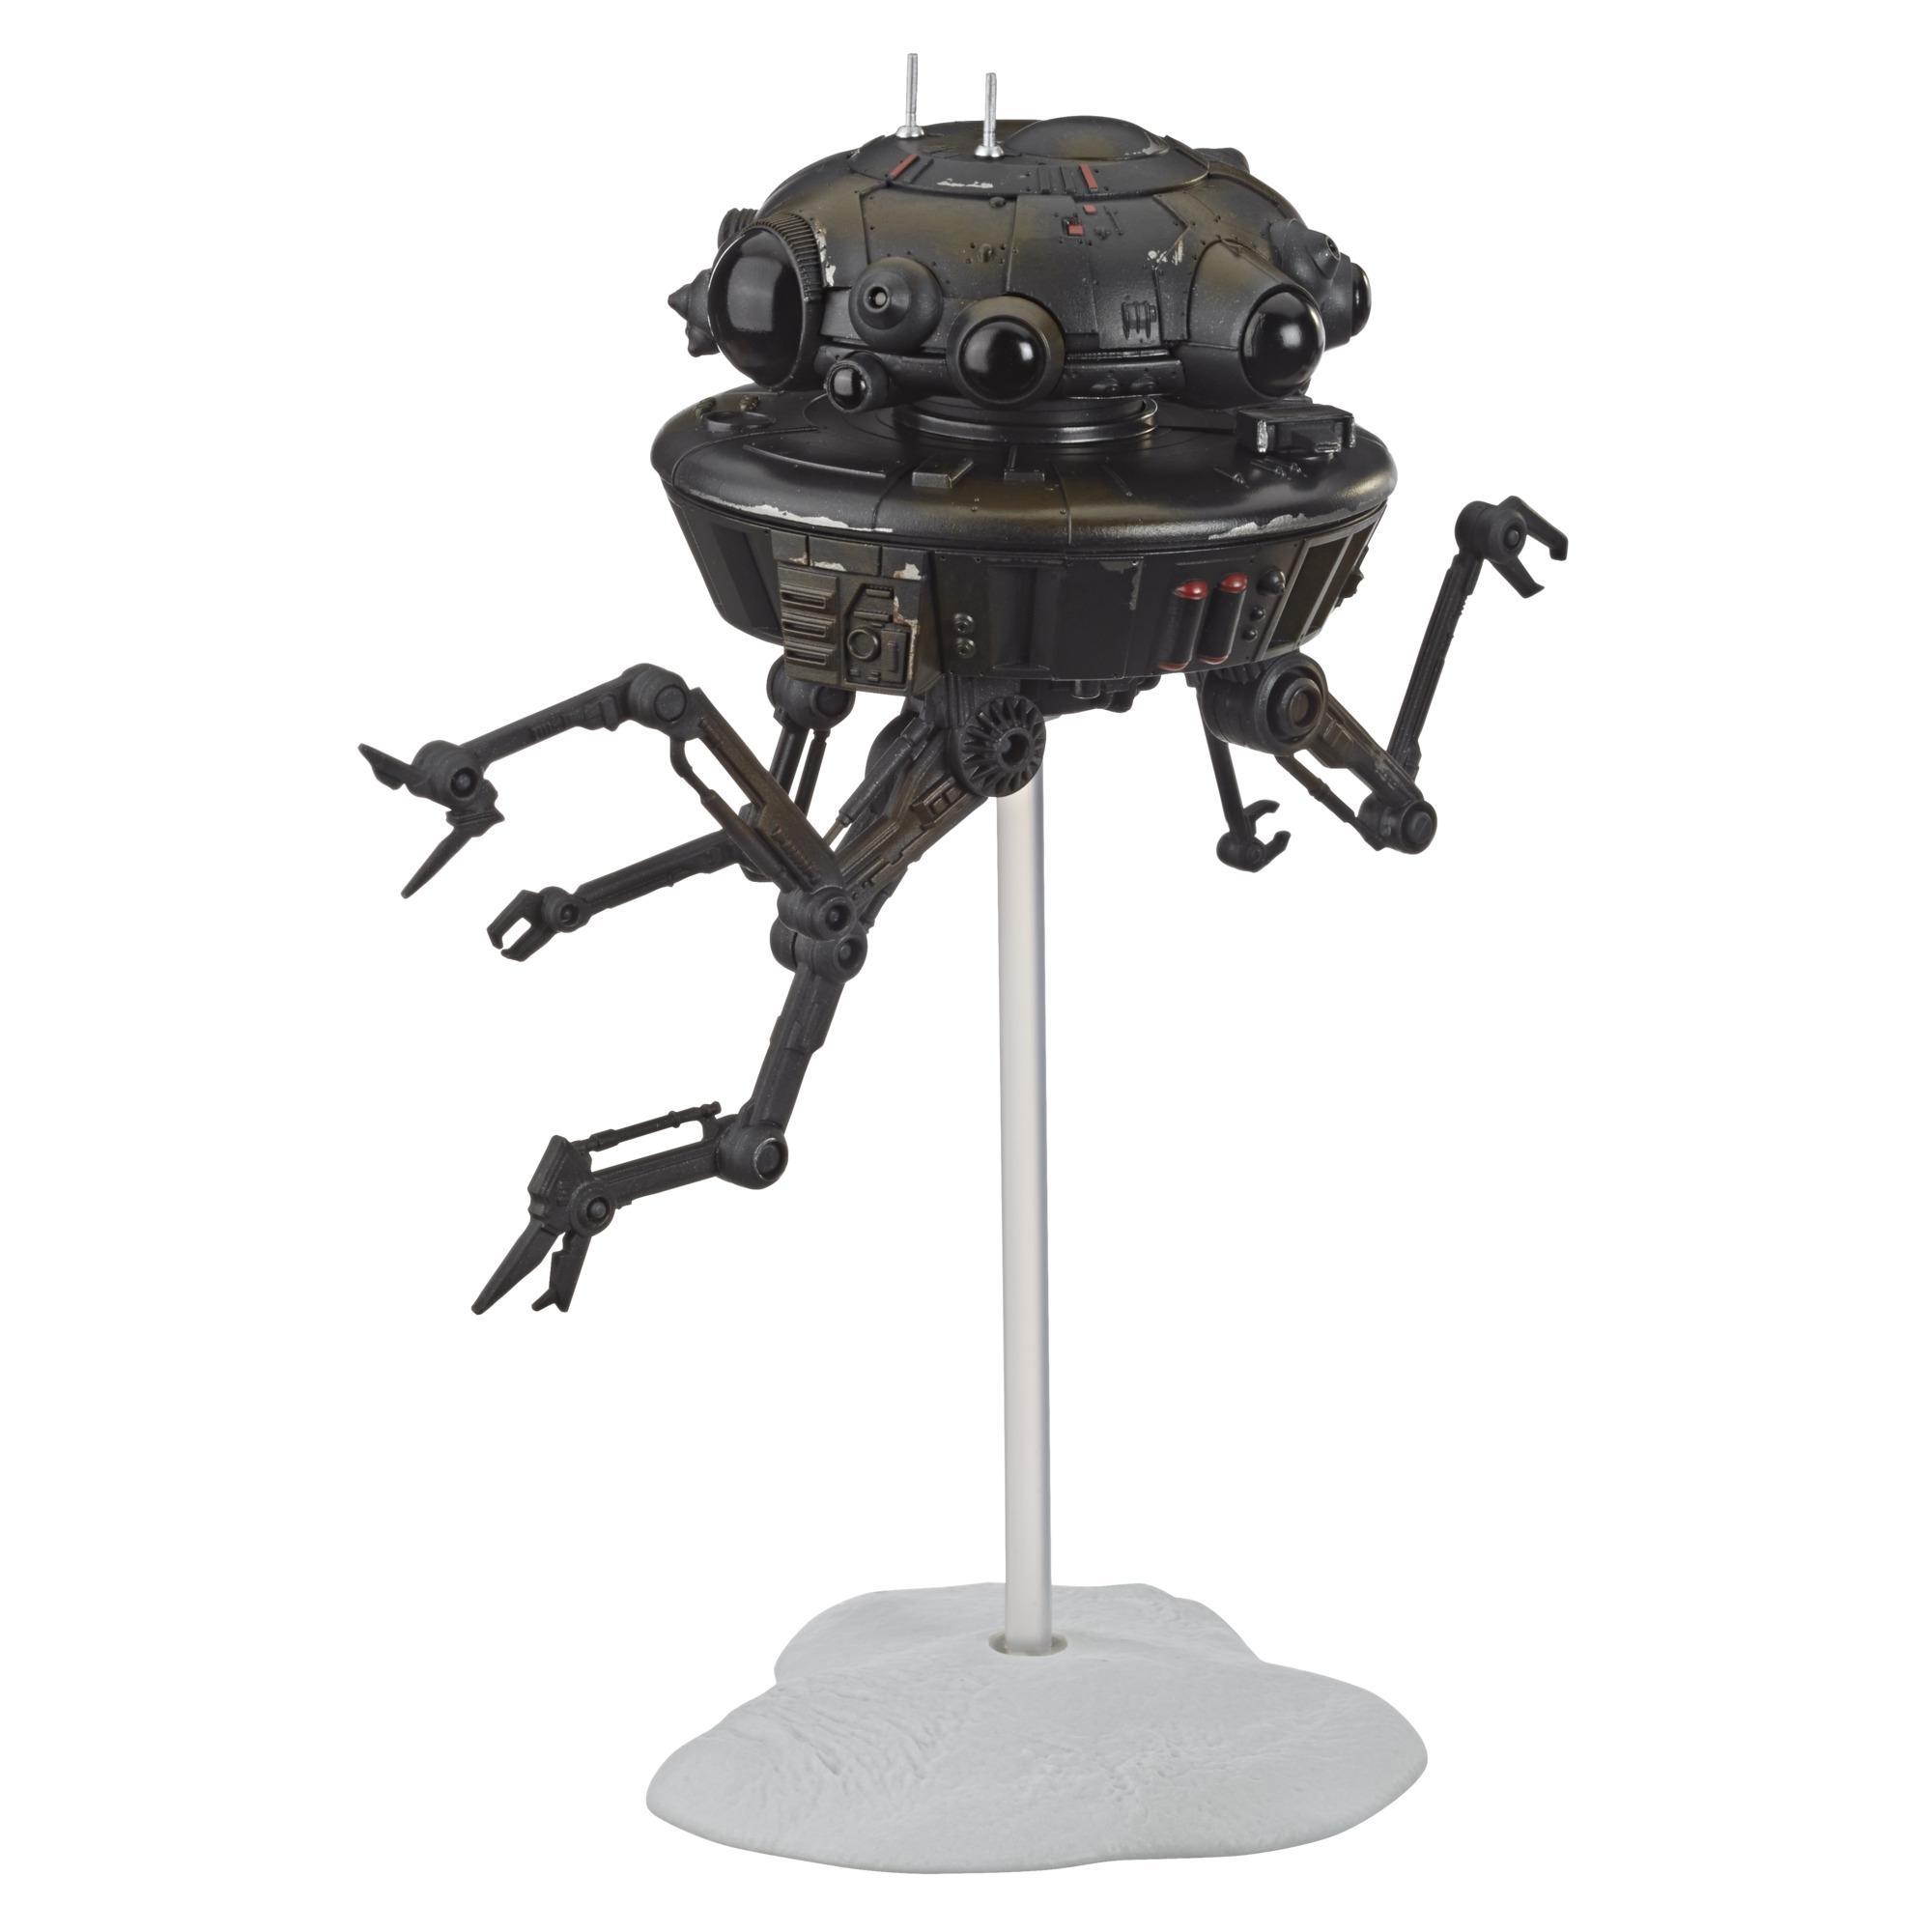 Star Wars 40th Anniversary Black Series Imperial Probe Droid Deluxe Figure 